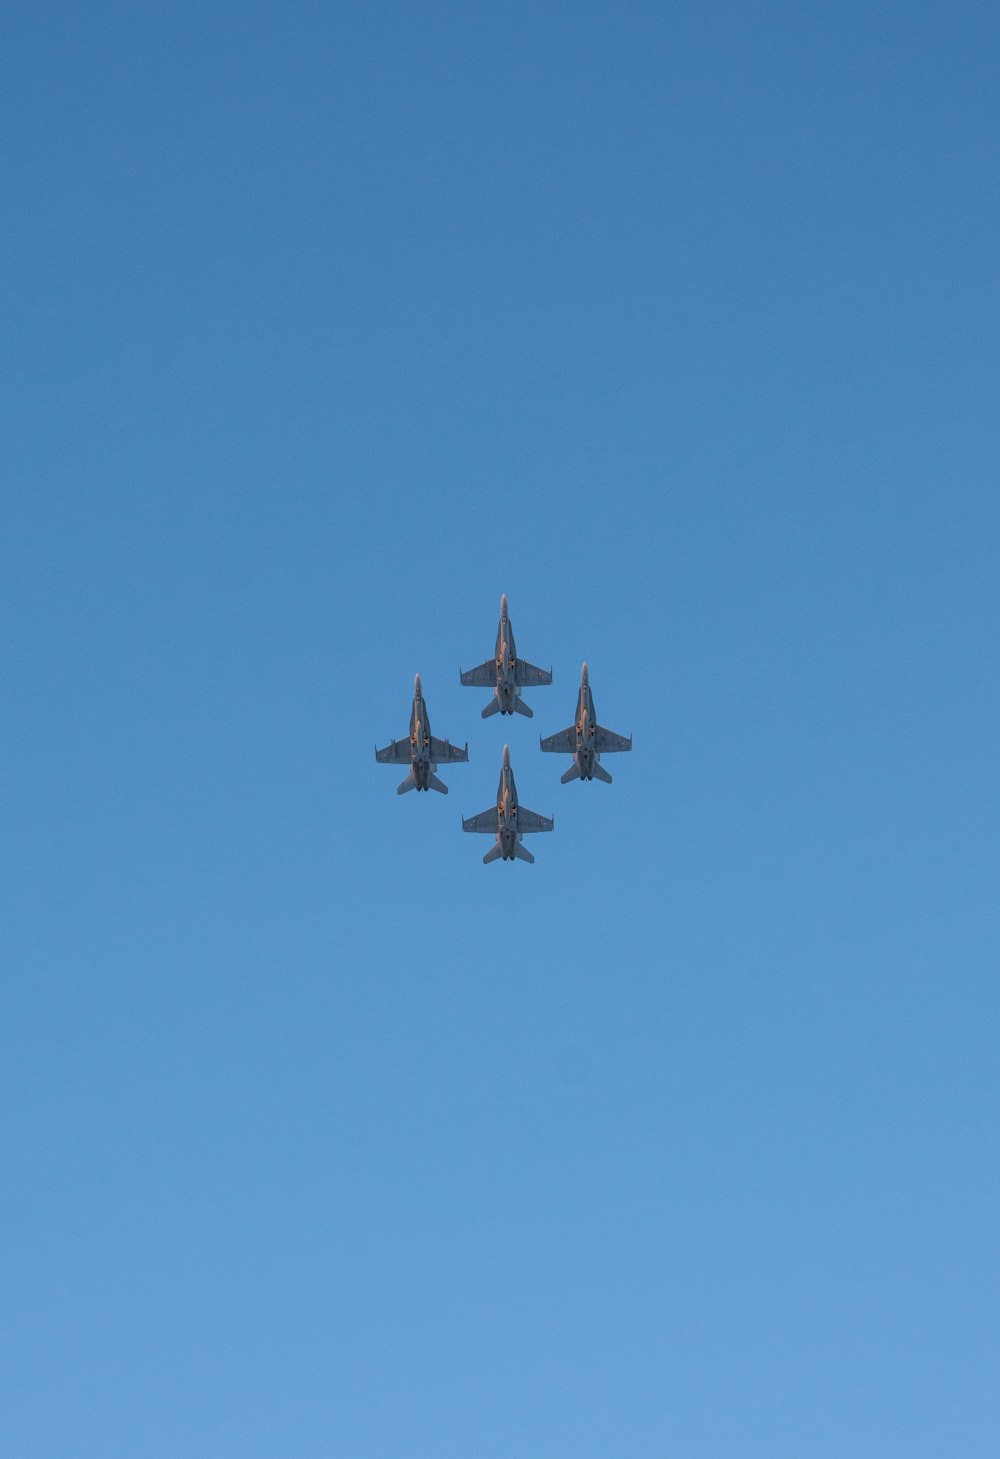 a group of fighter jets flying through a blue sky